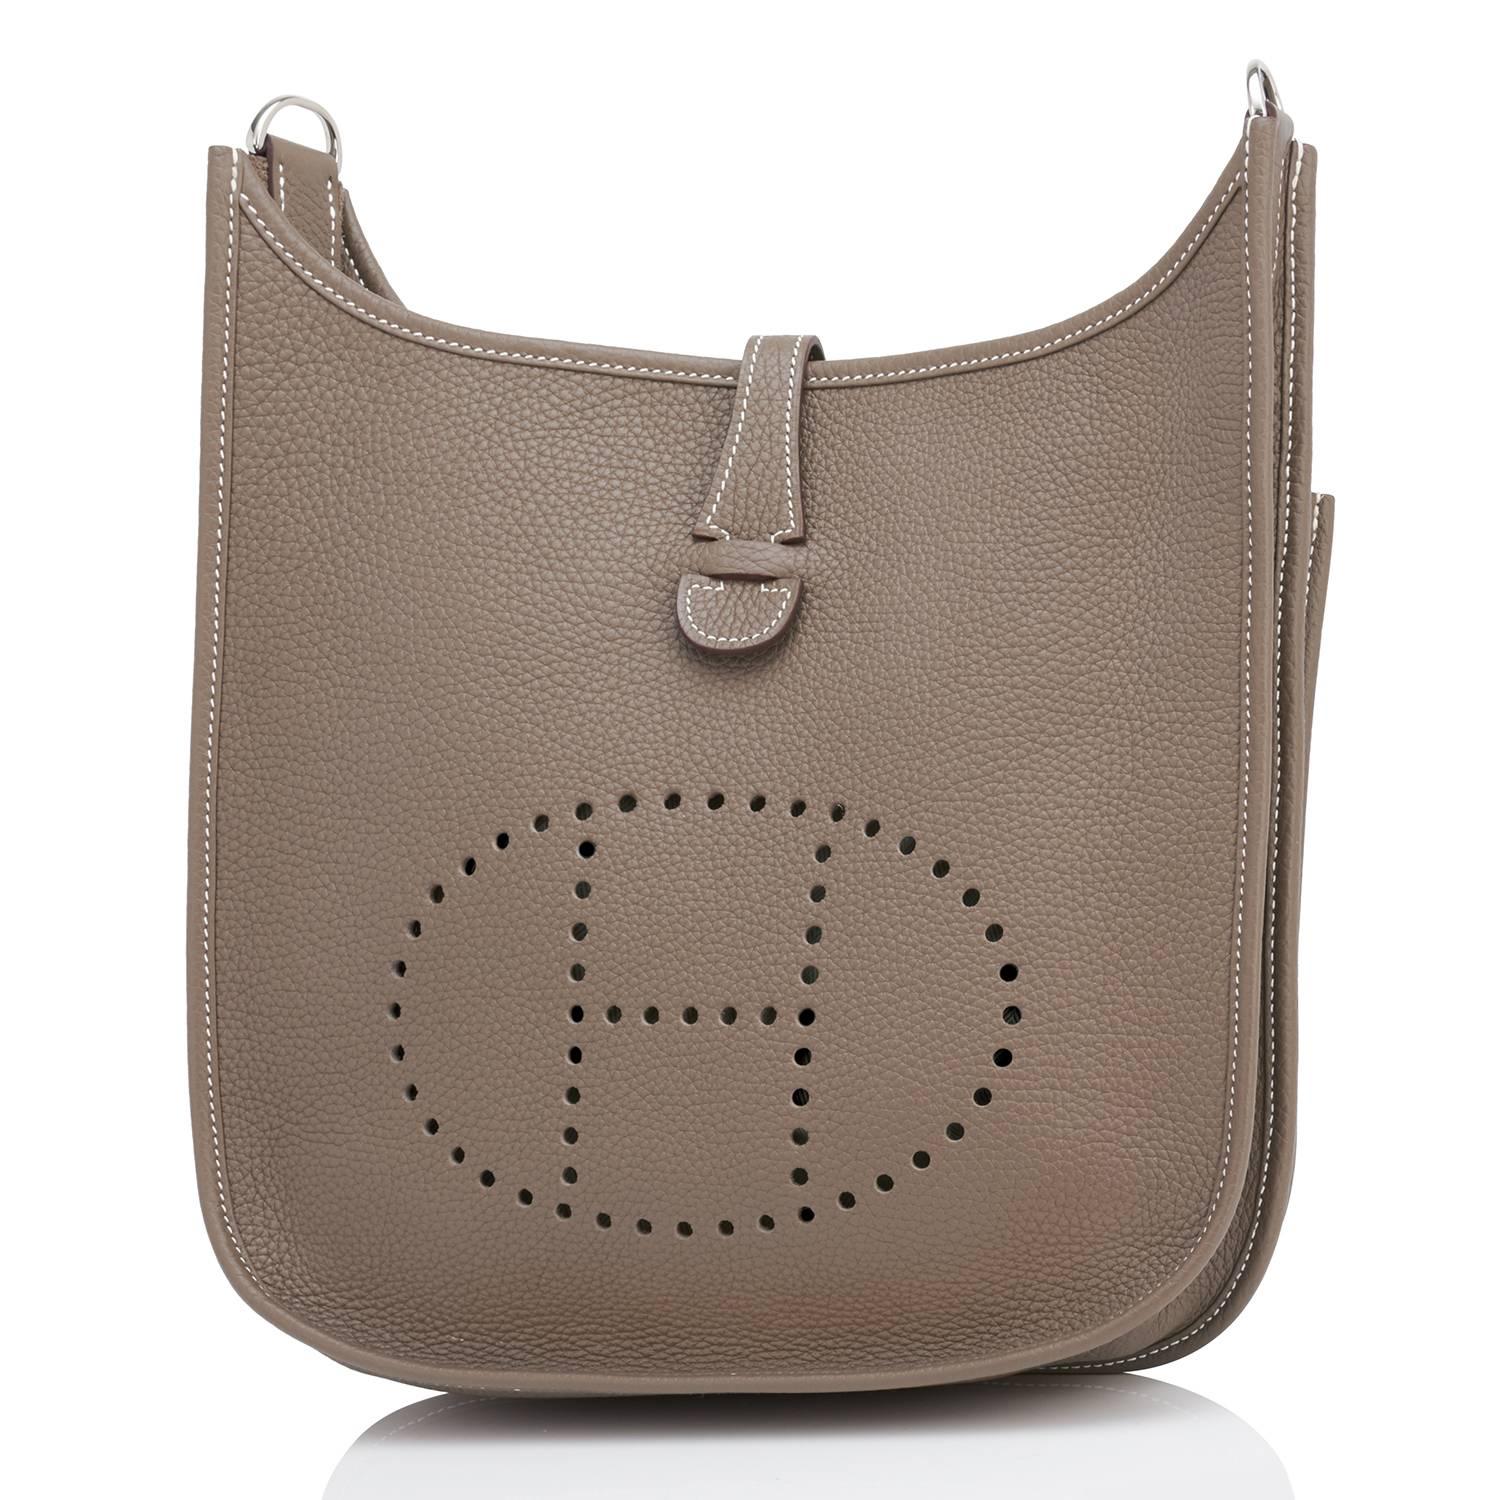 Hermes Etoupe Evelyne PM 29cm Taupe Messenger Shoulder Bag
Brand New in Box.  Store Fresh.  Pristine Condition.
Perfect gift!  Comes with canvas shoulder strap, sleepers, and Hermes box.
The ideal summer (and year-round) functional bag perfect for